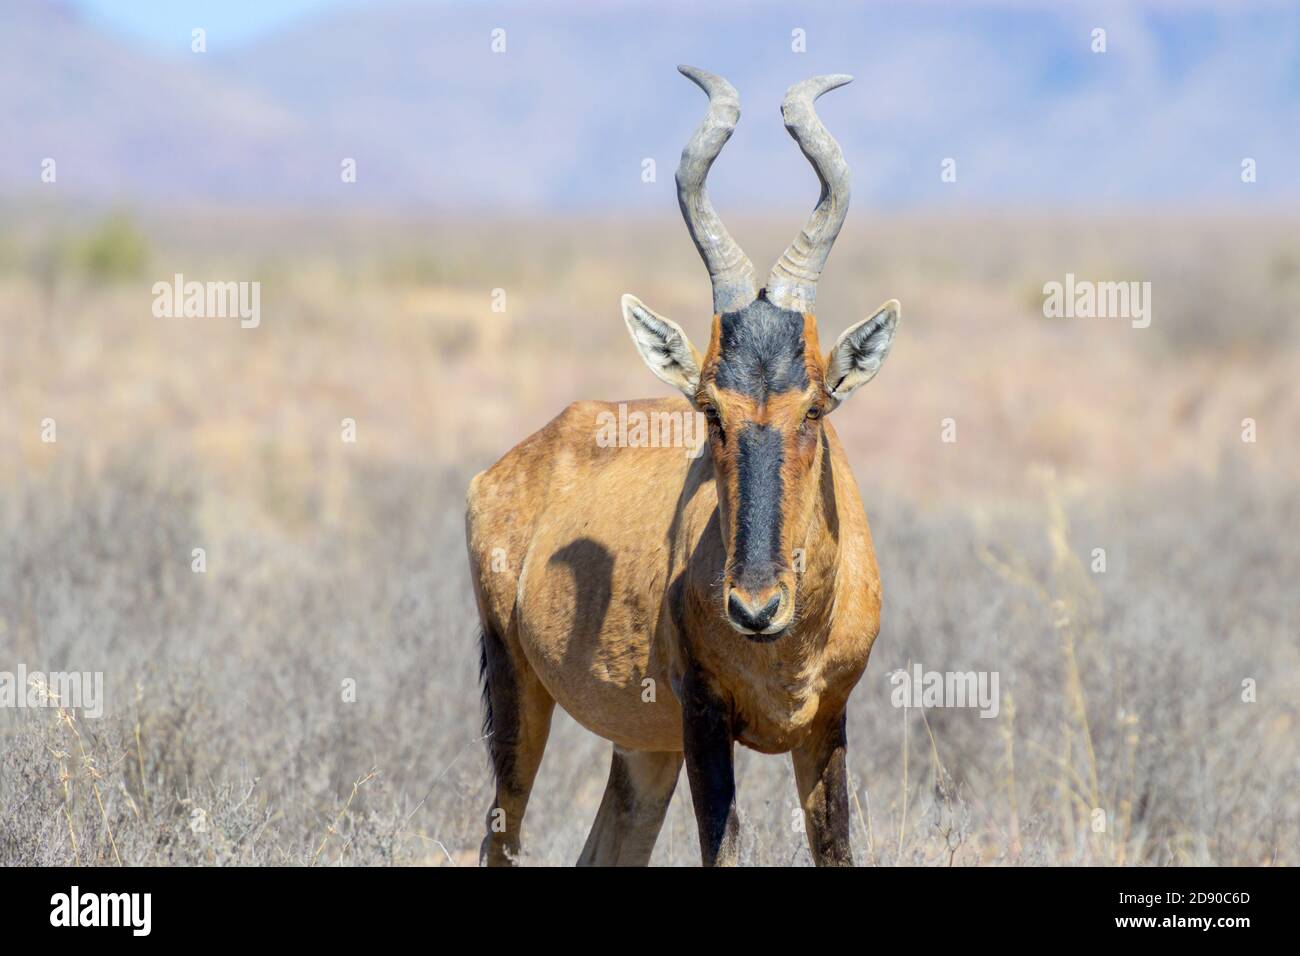 Red hartebeest (Alcelaphus buselaphus), portrait, looking at camera, Mountain Zebra National Park, Eastern Cape, South Africa Stock Photo